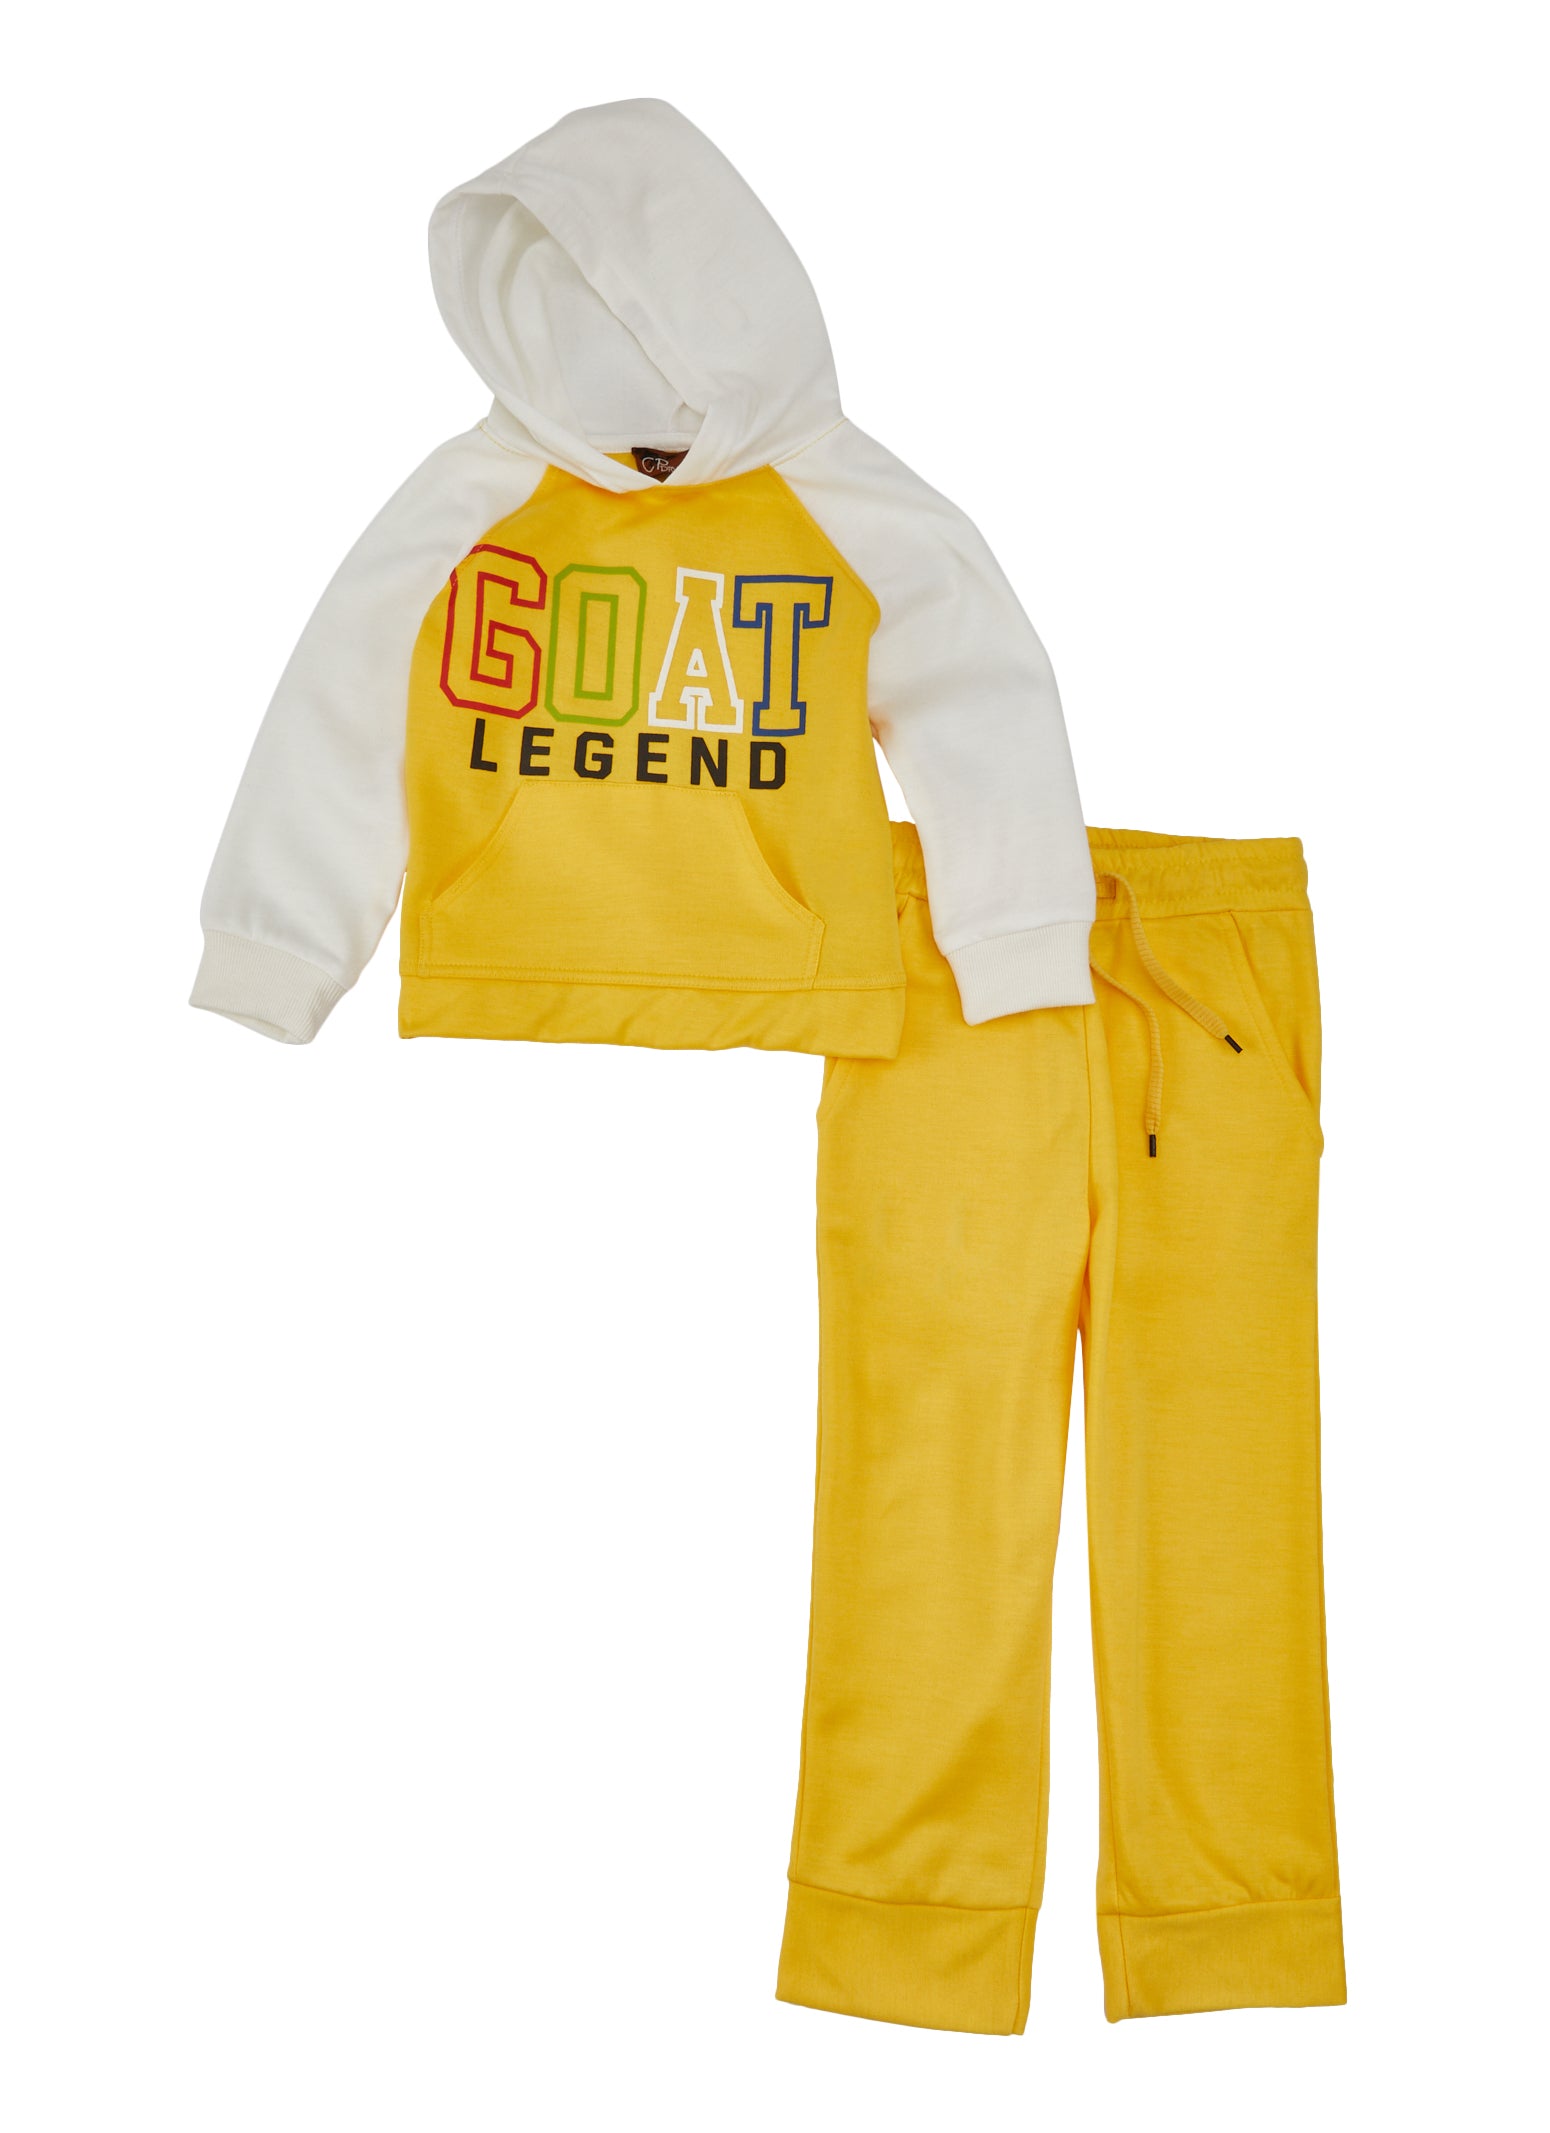 Little Boys Color Block GOAT Legend Pullover Hoodie and Joggers, Yellow, Size 7